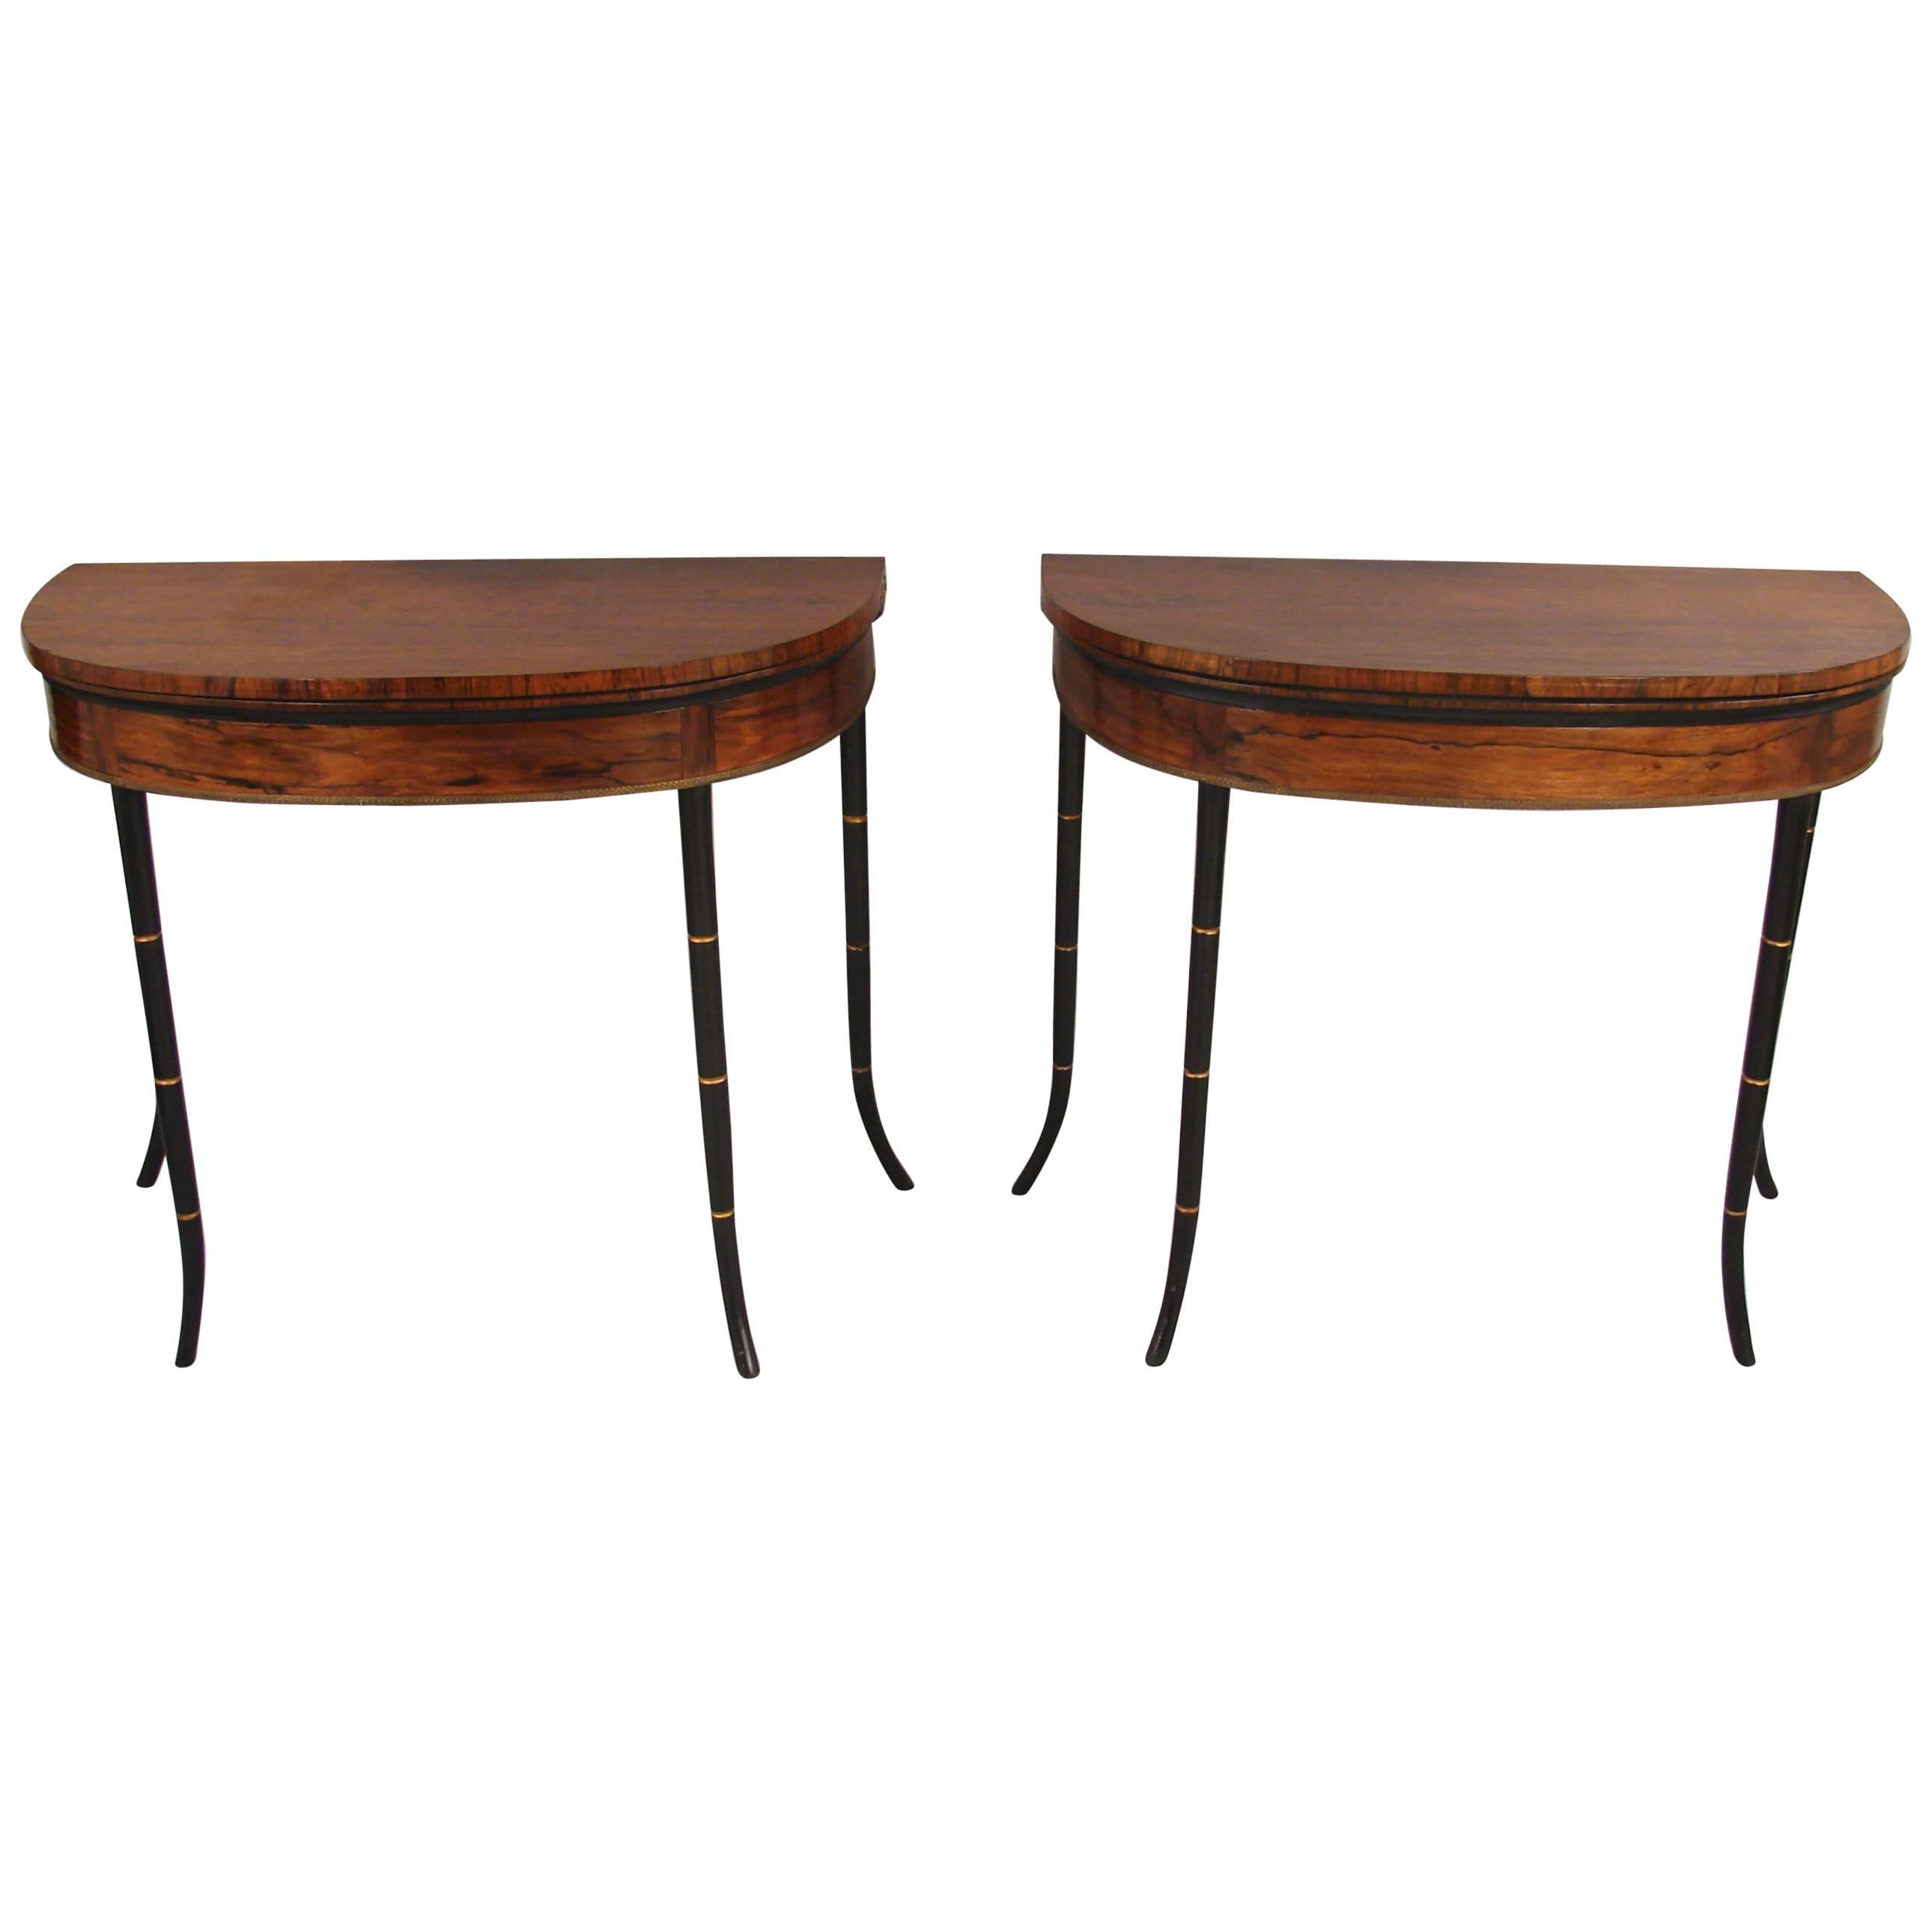 Elegant and Stylish Pair of Regency Rosewood Games Tables